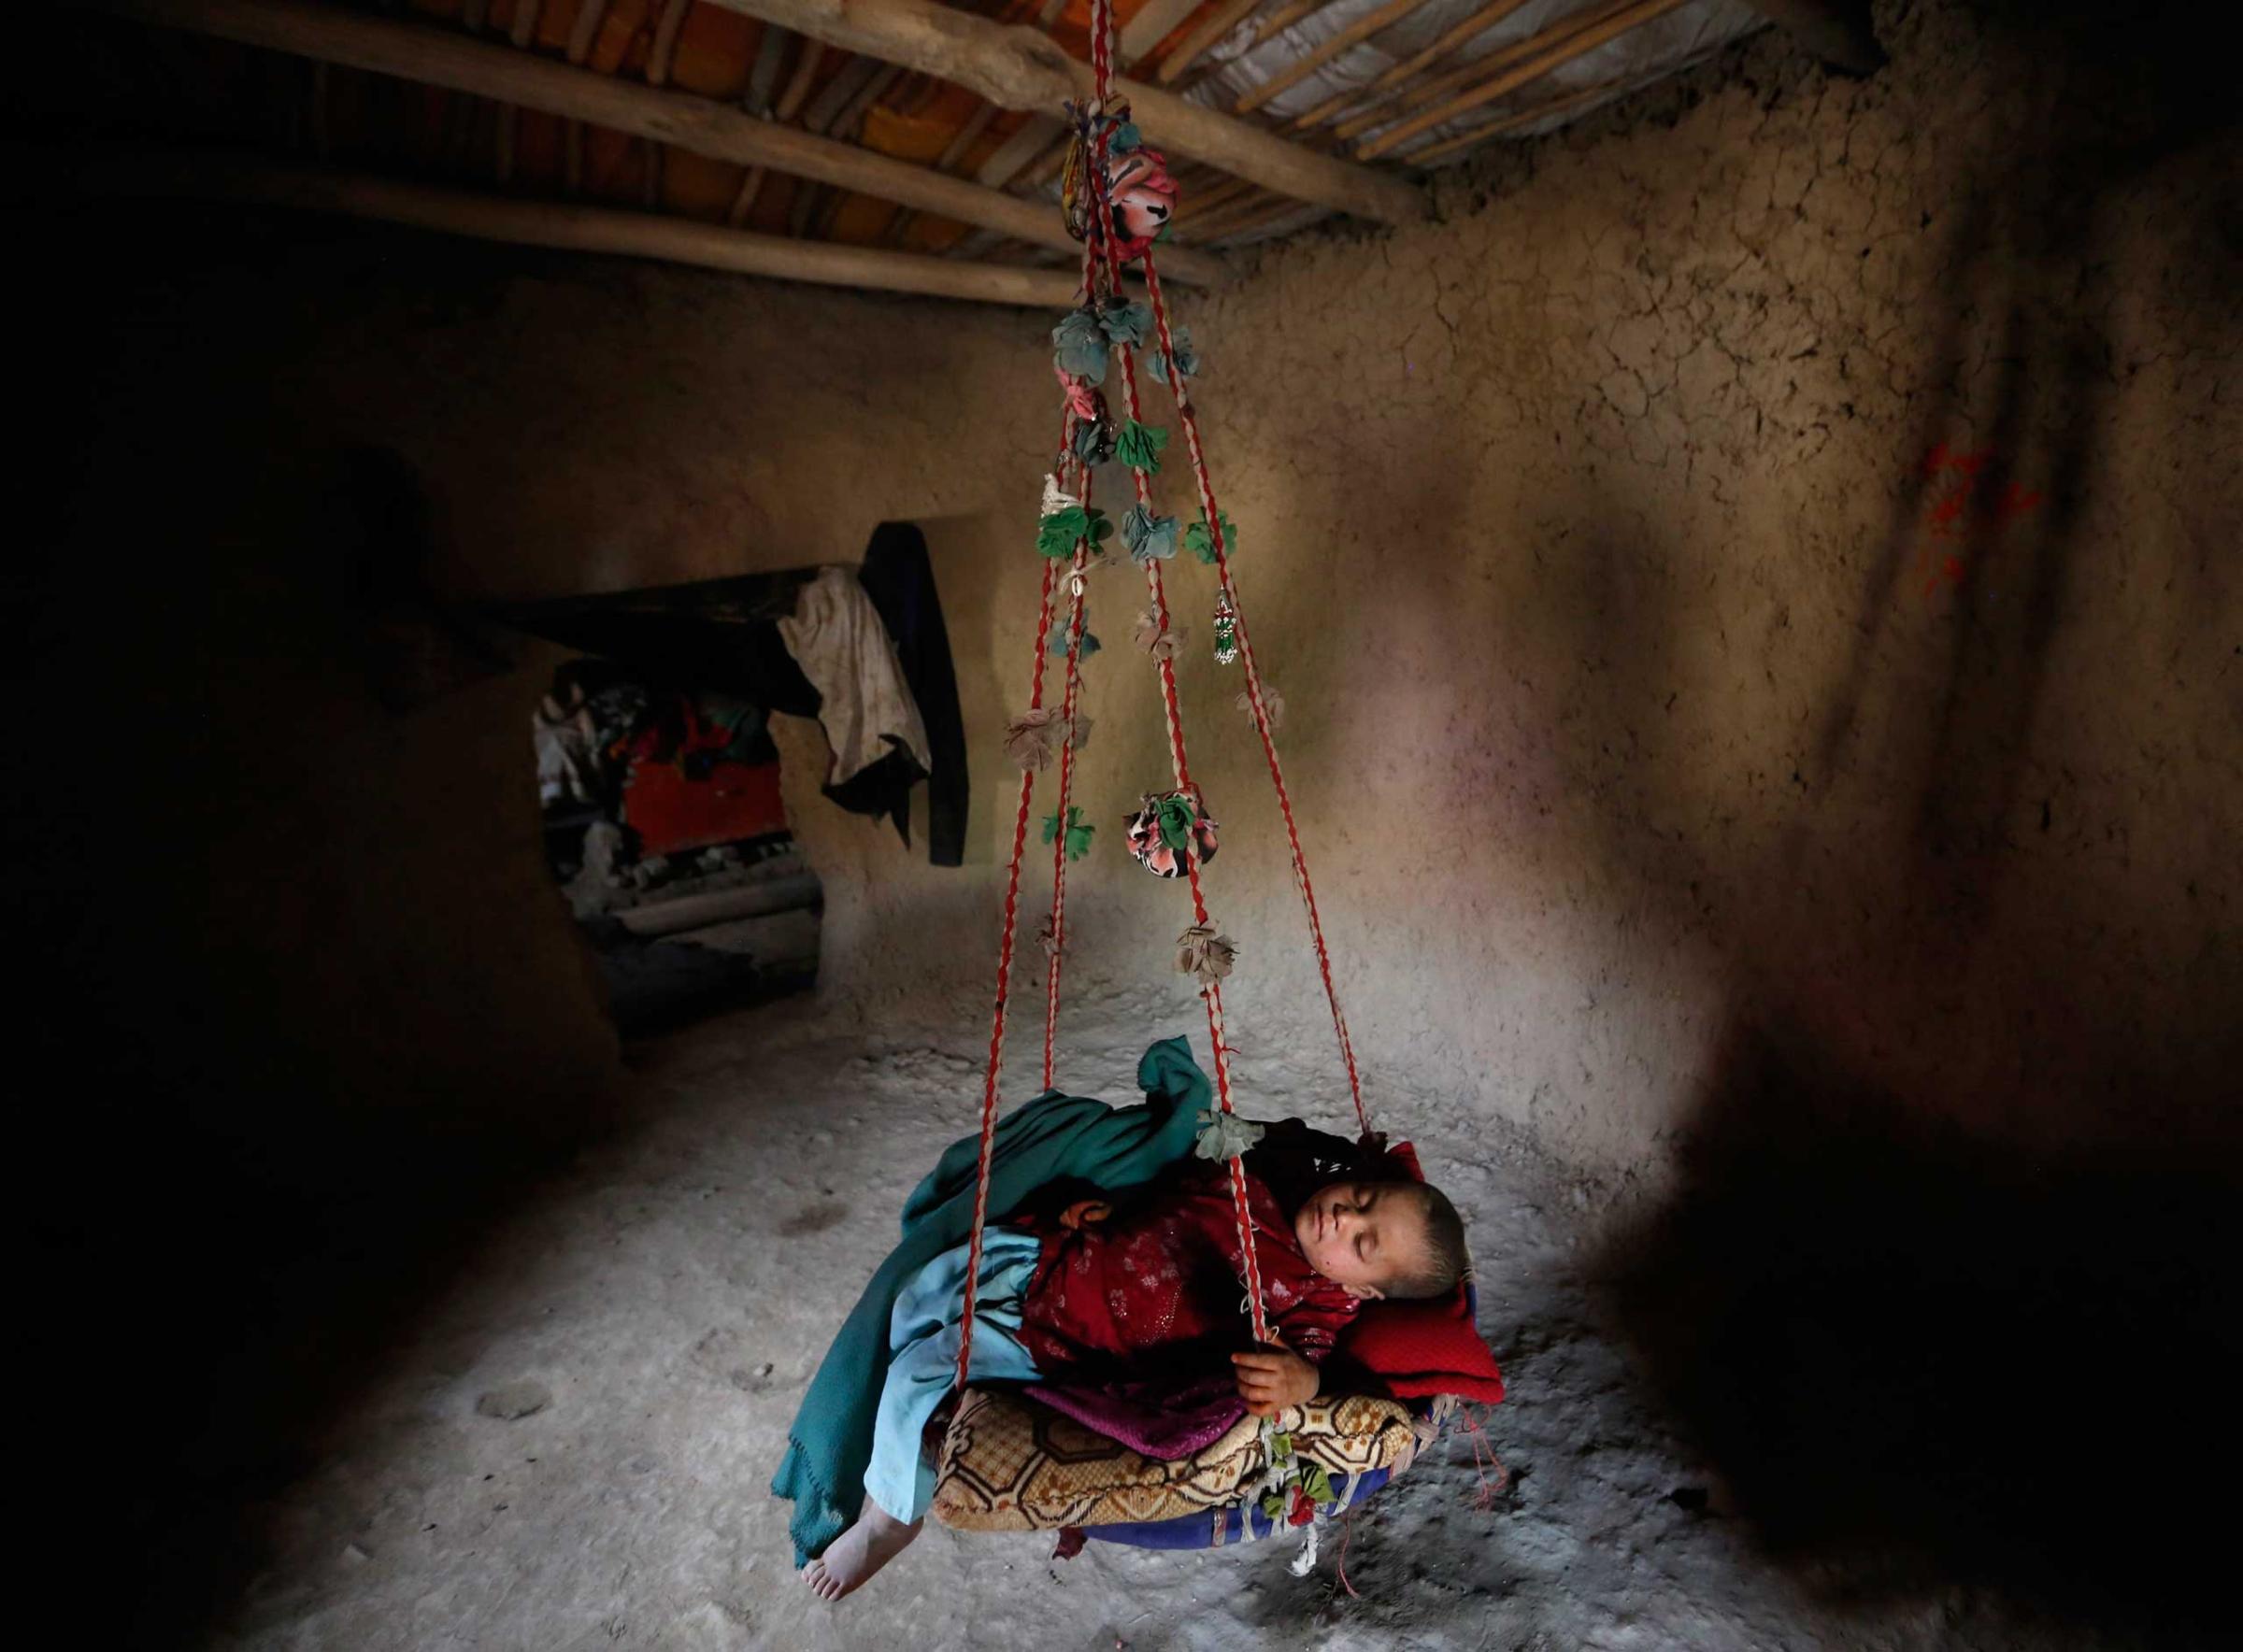 An internally displaced Afghan child sleeps in a hanging cot inside a shelter at a refugee camp in Kabul